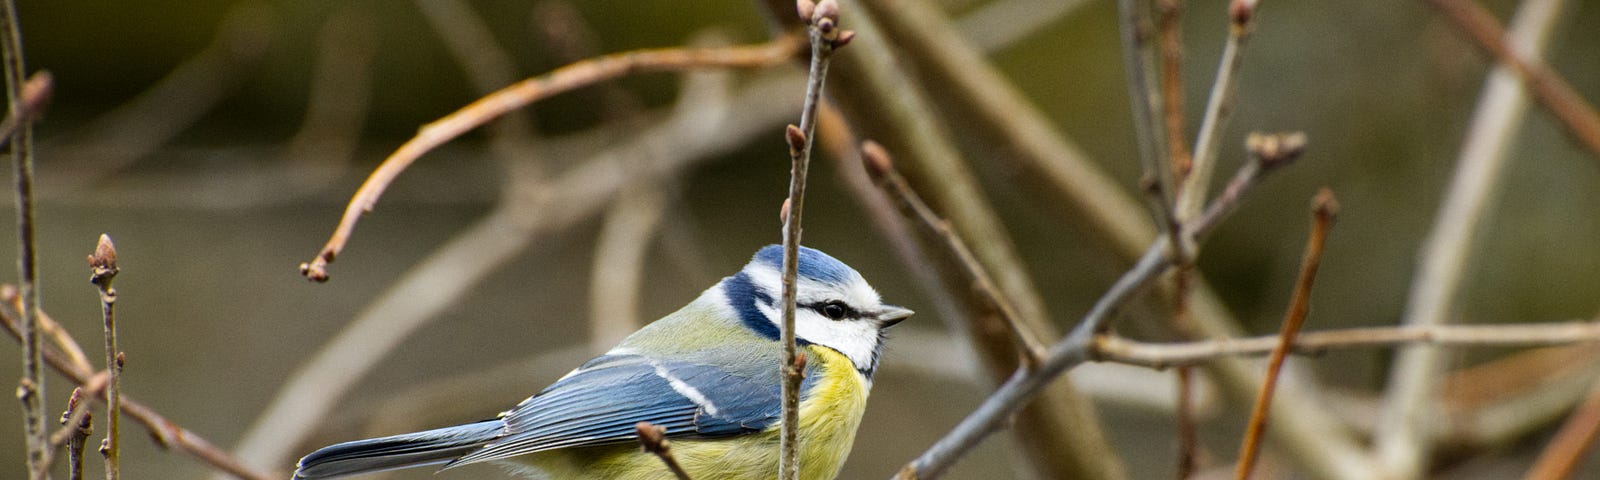 A blue tit perched in some branches